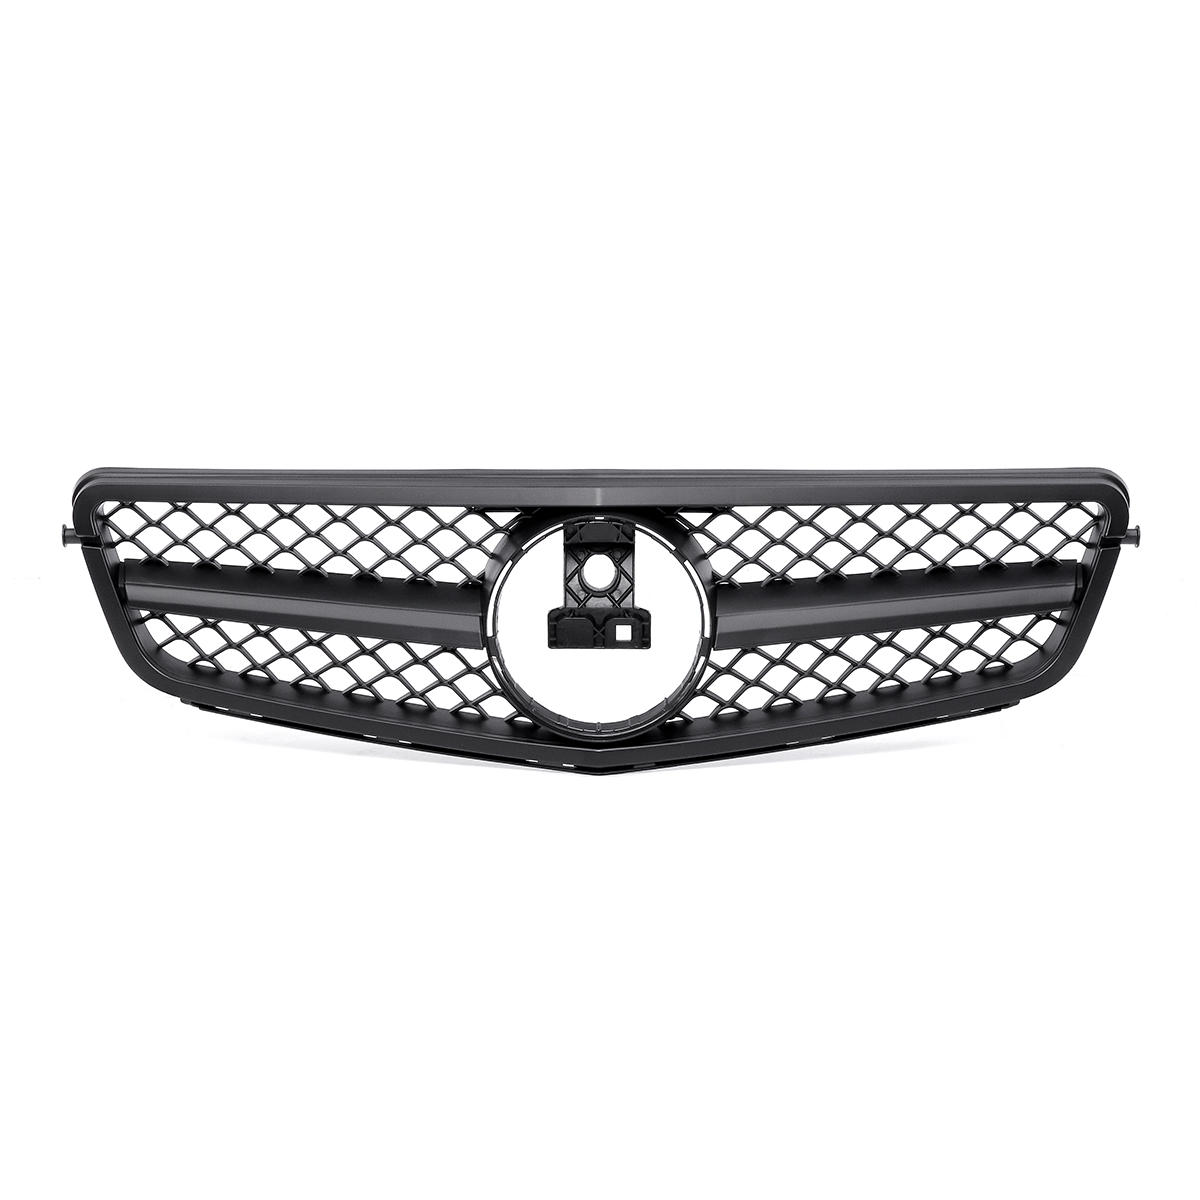 

C63 AMG Style Front Upper Grille Grill For Mercedes Benz C Class W204 C180 C200 C300 C350 2008-2014